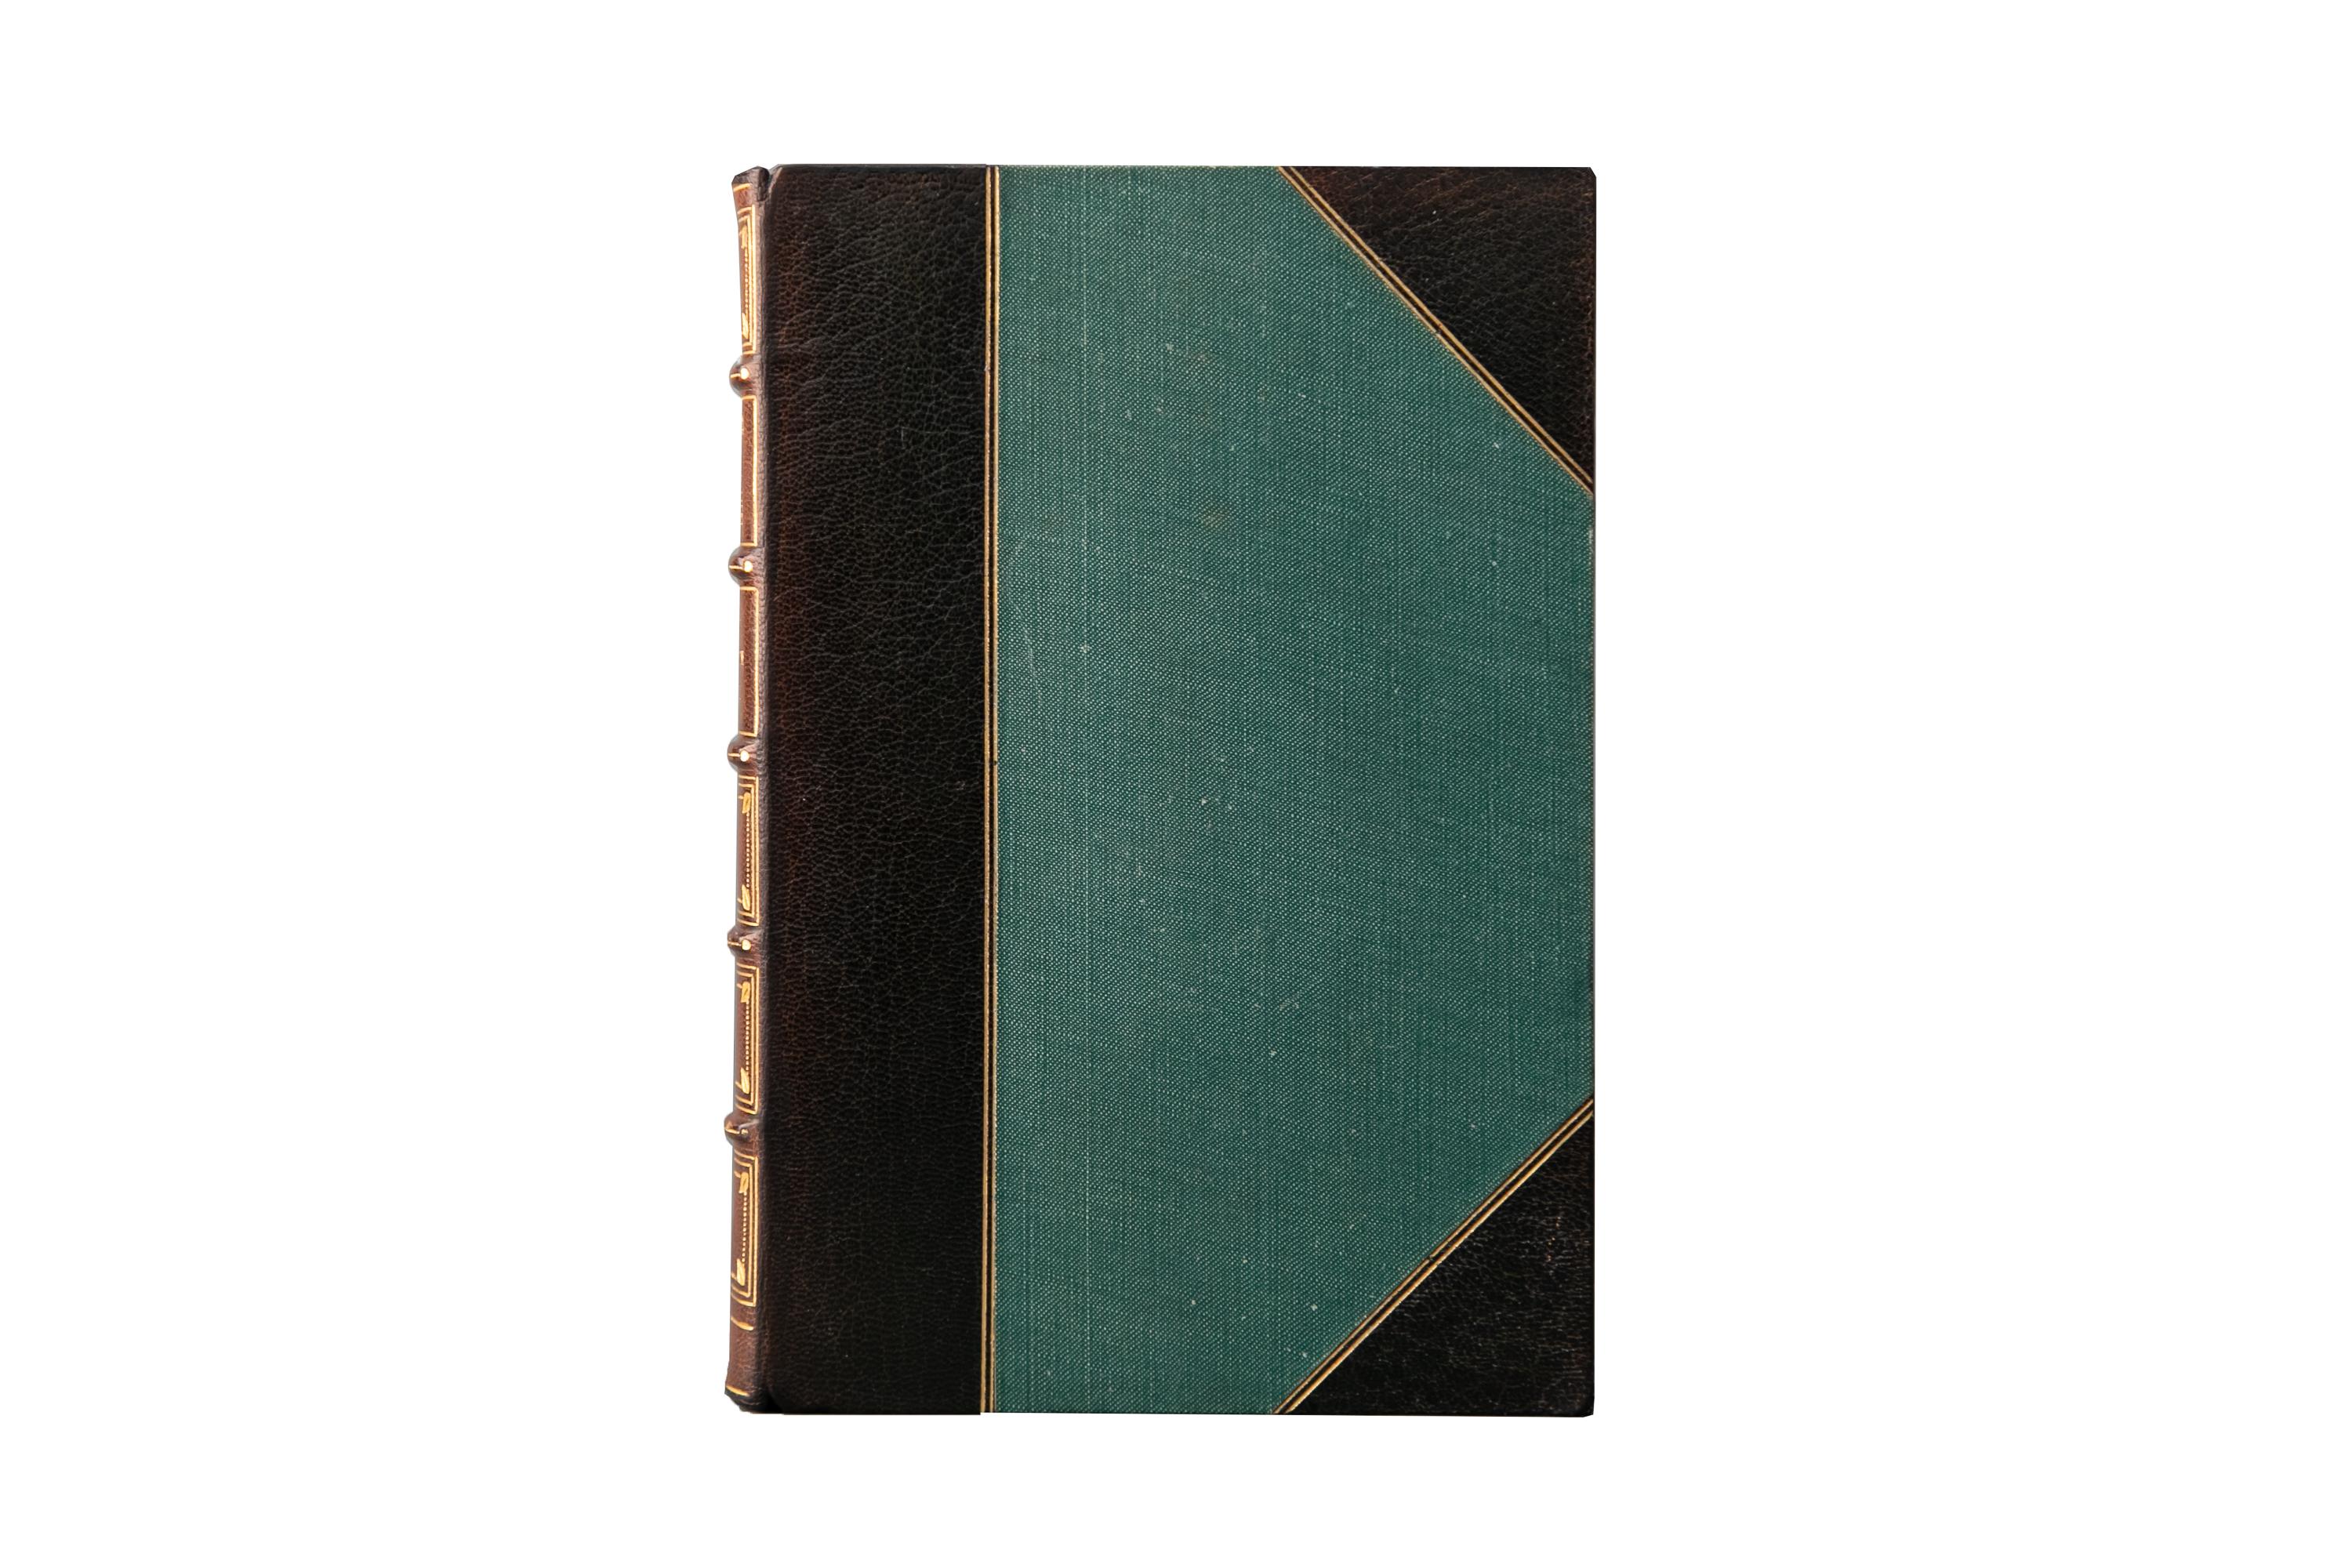 12 Volumes. The Brontë Sisters, Novels. Thornton Edition. Bound by Root & Son in 3/4 tan morocco and linen boards, double bordered in gilt-tooling. The spines are faded to brown and display raised bands, label lettering, panel details, and